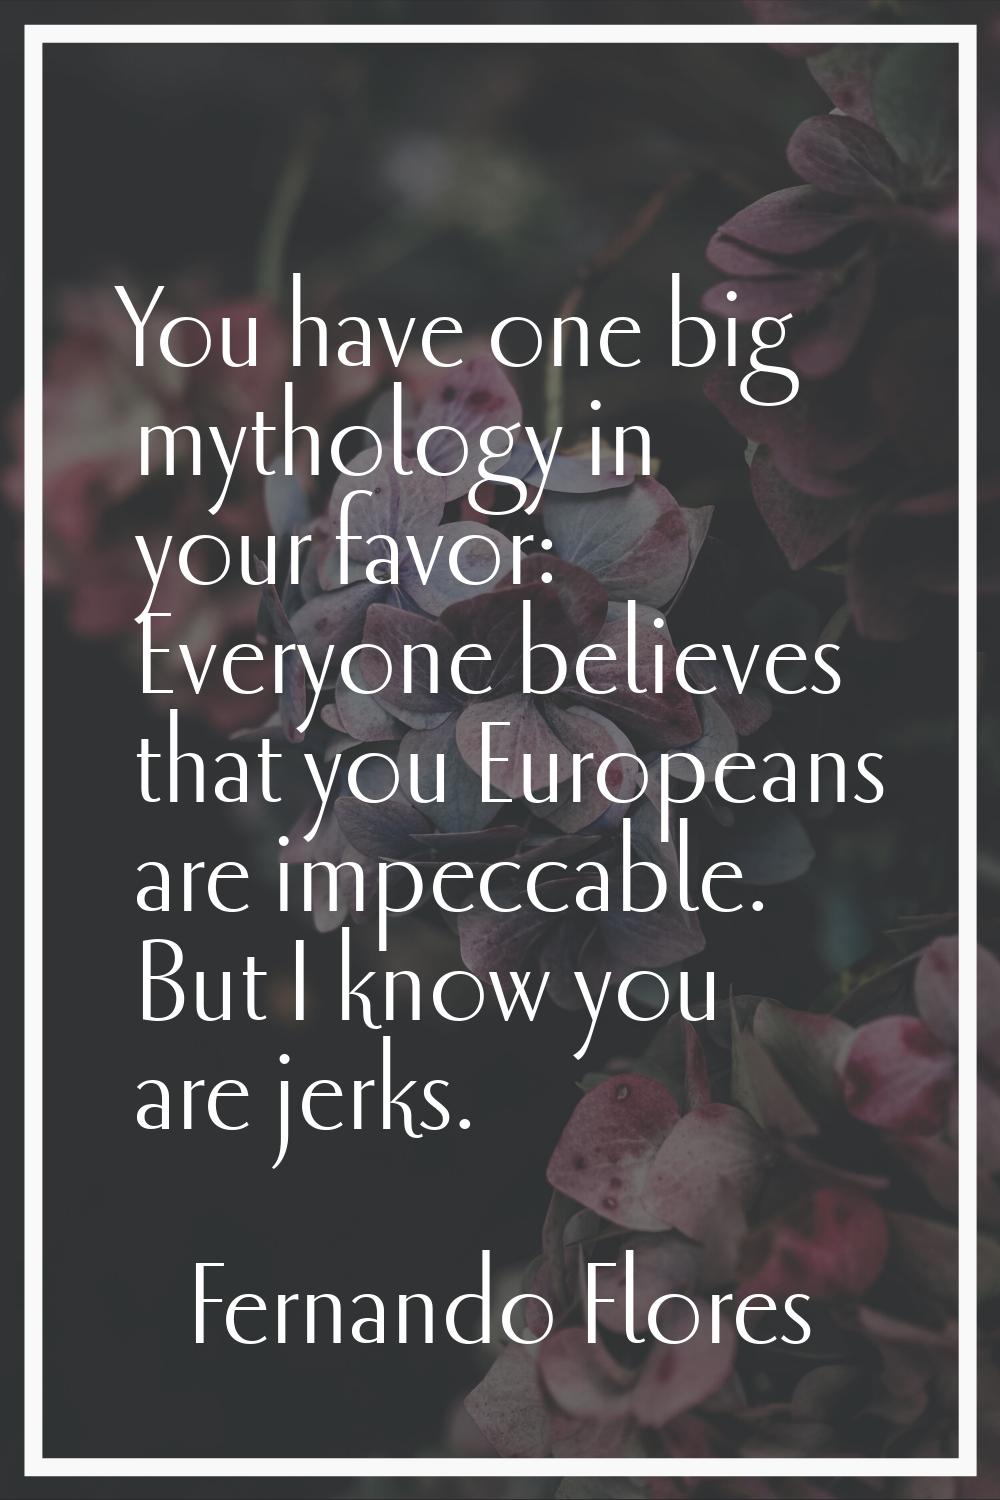 You have one big mythology in your favor: Everyone believes that you Europeans are impeccable. But 